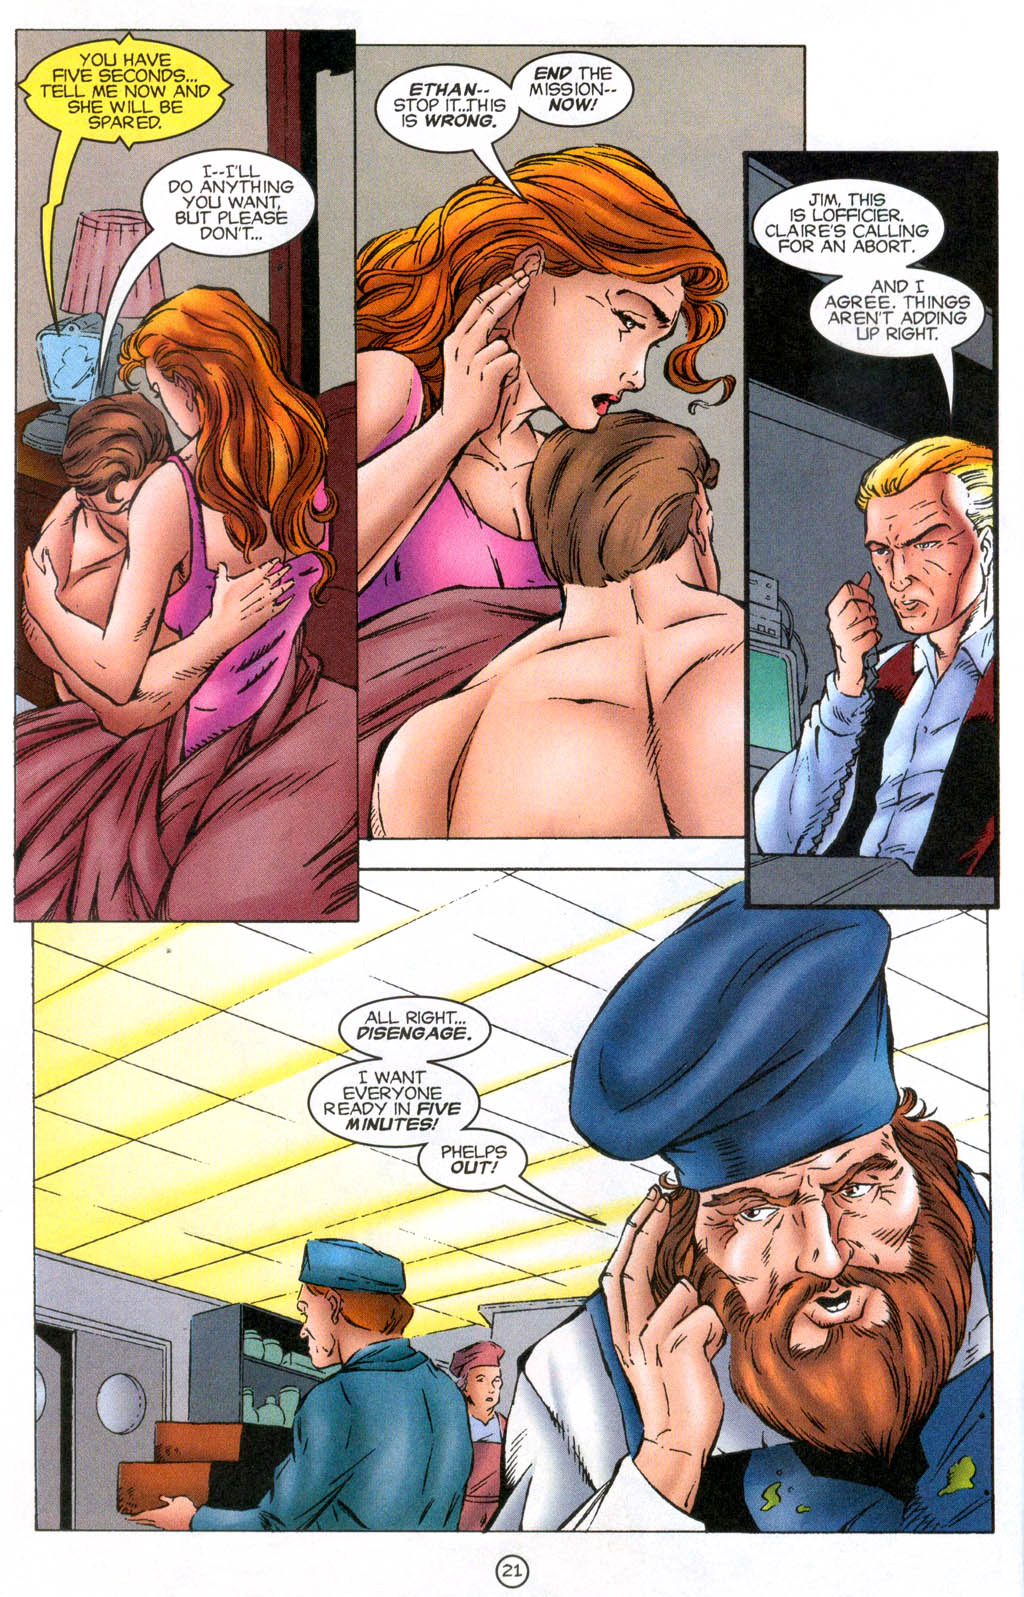 Read online Mission Impossible comic -  Issue # Full - 23